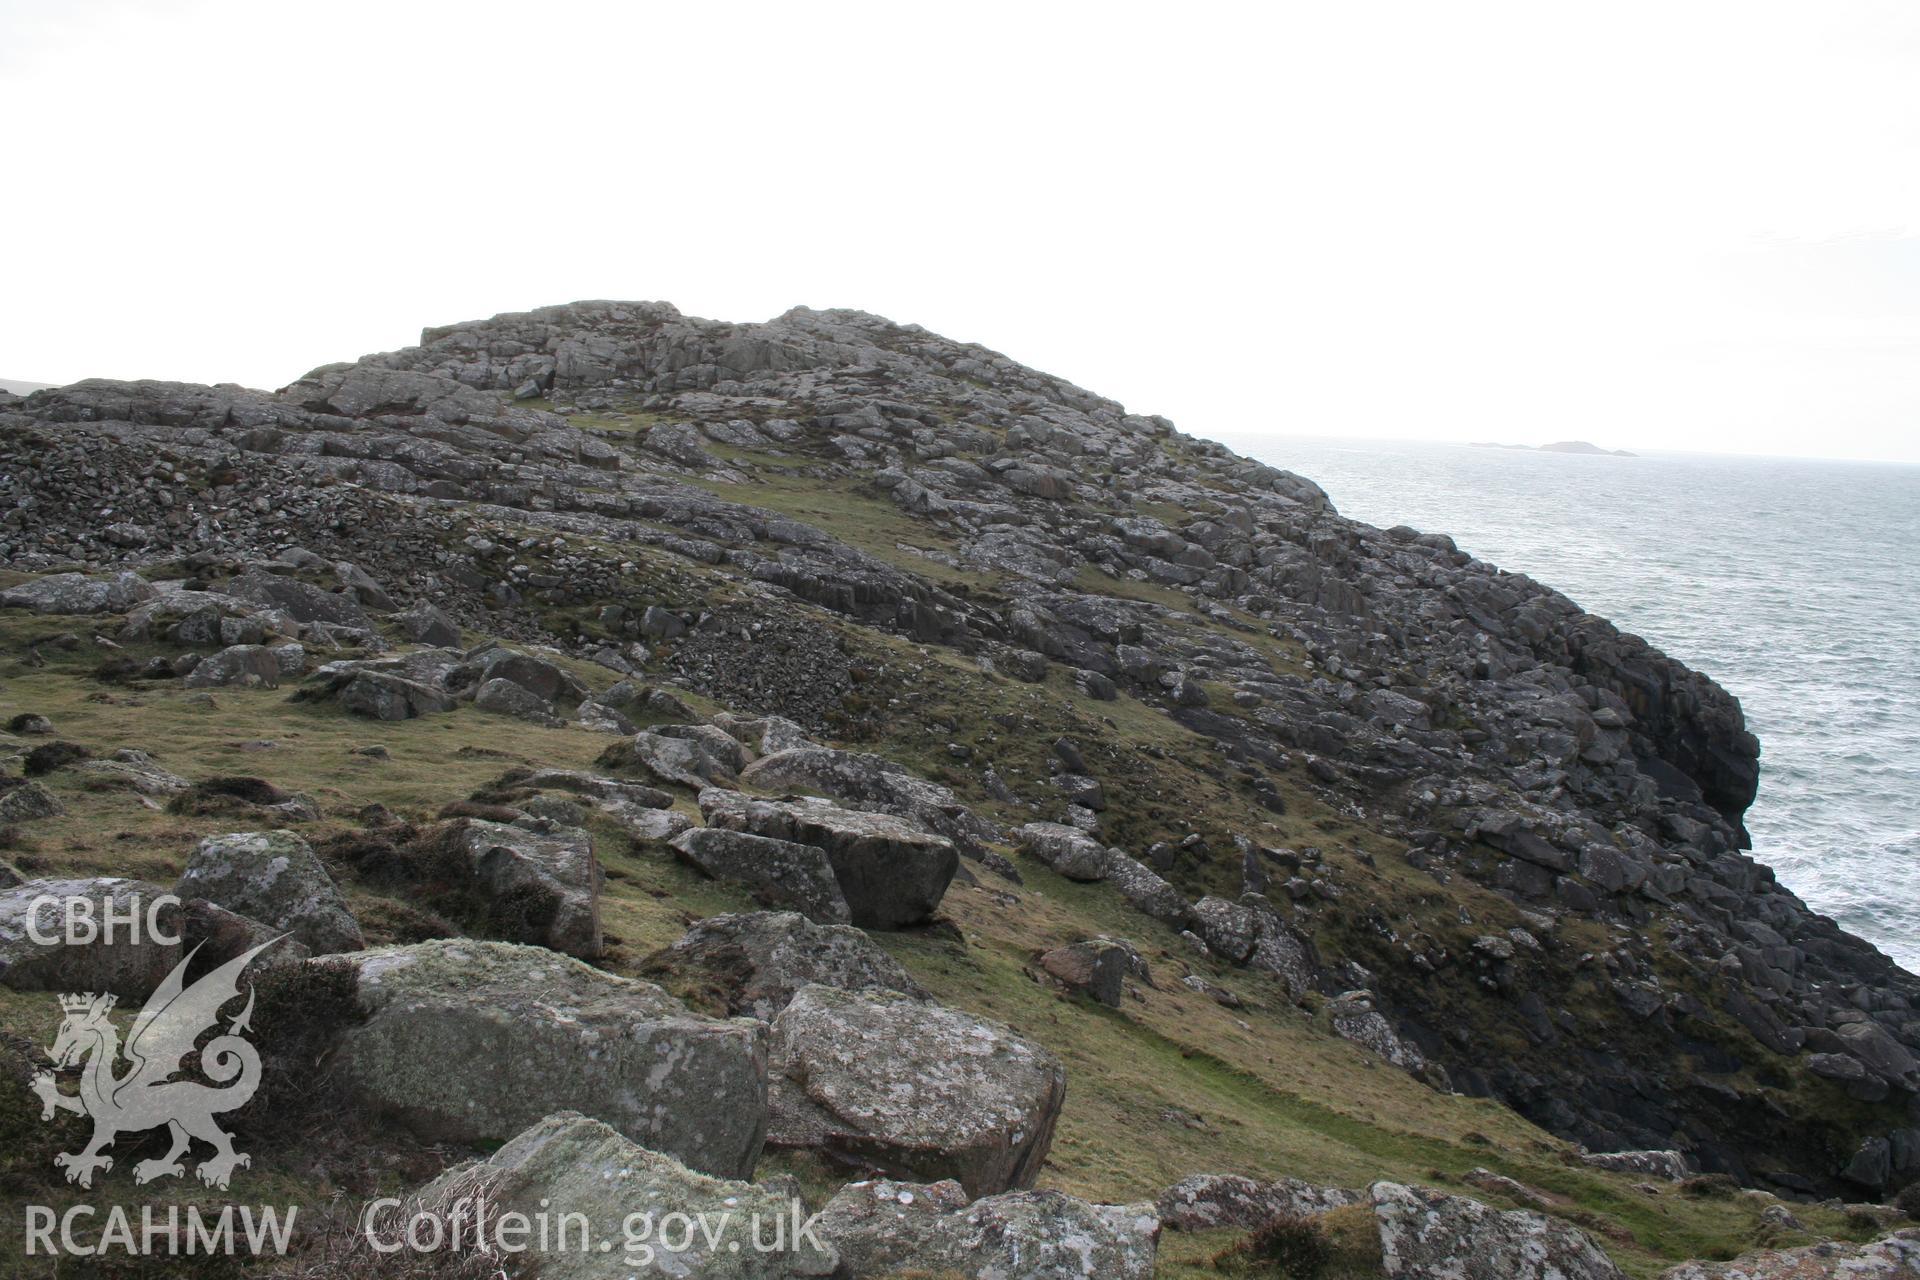 Clawdd y Milwyr promontory fort. General view of main ramparts and northern part of fort, from east.